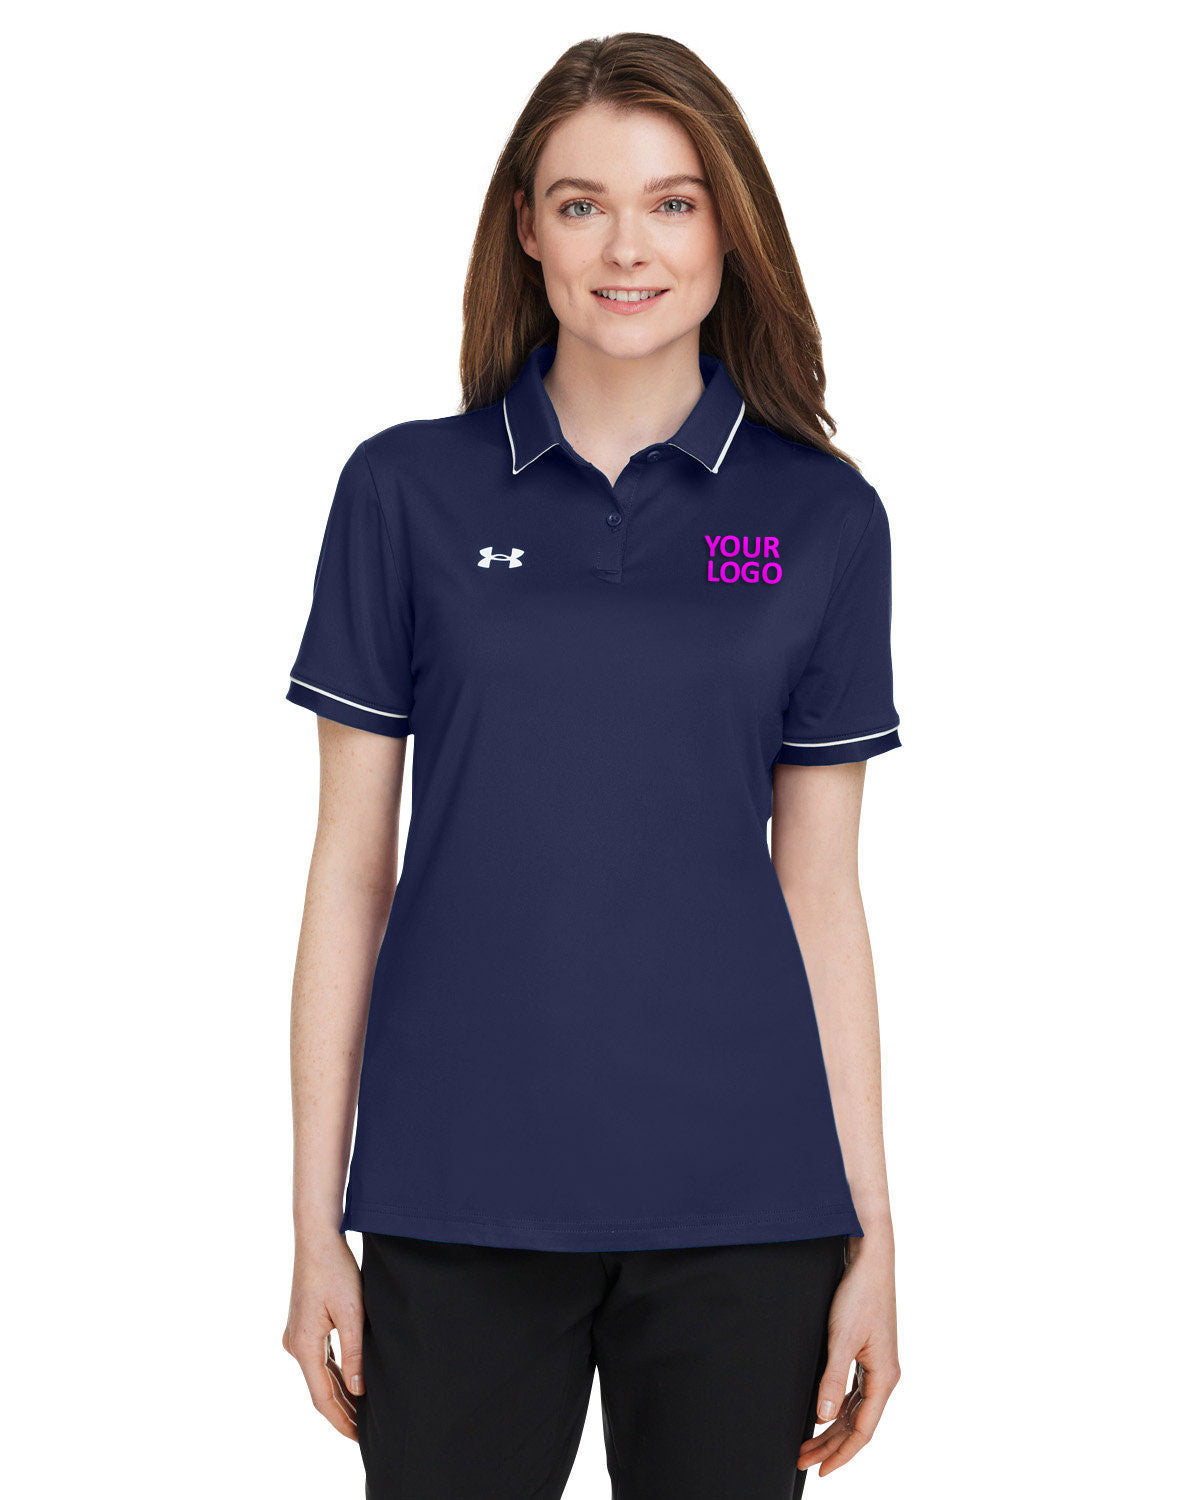 Under Armour Ladies Tipped Teams Performance Customized Polos, Navy